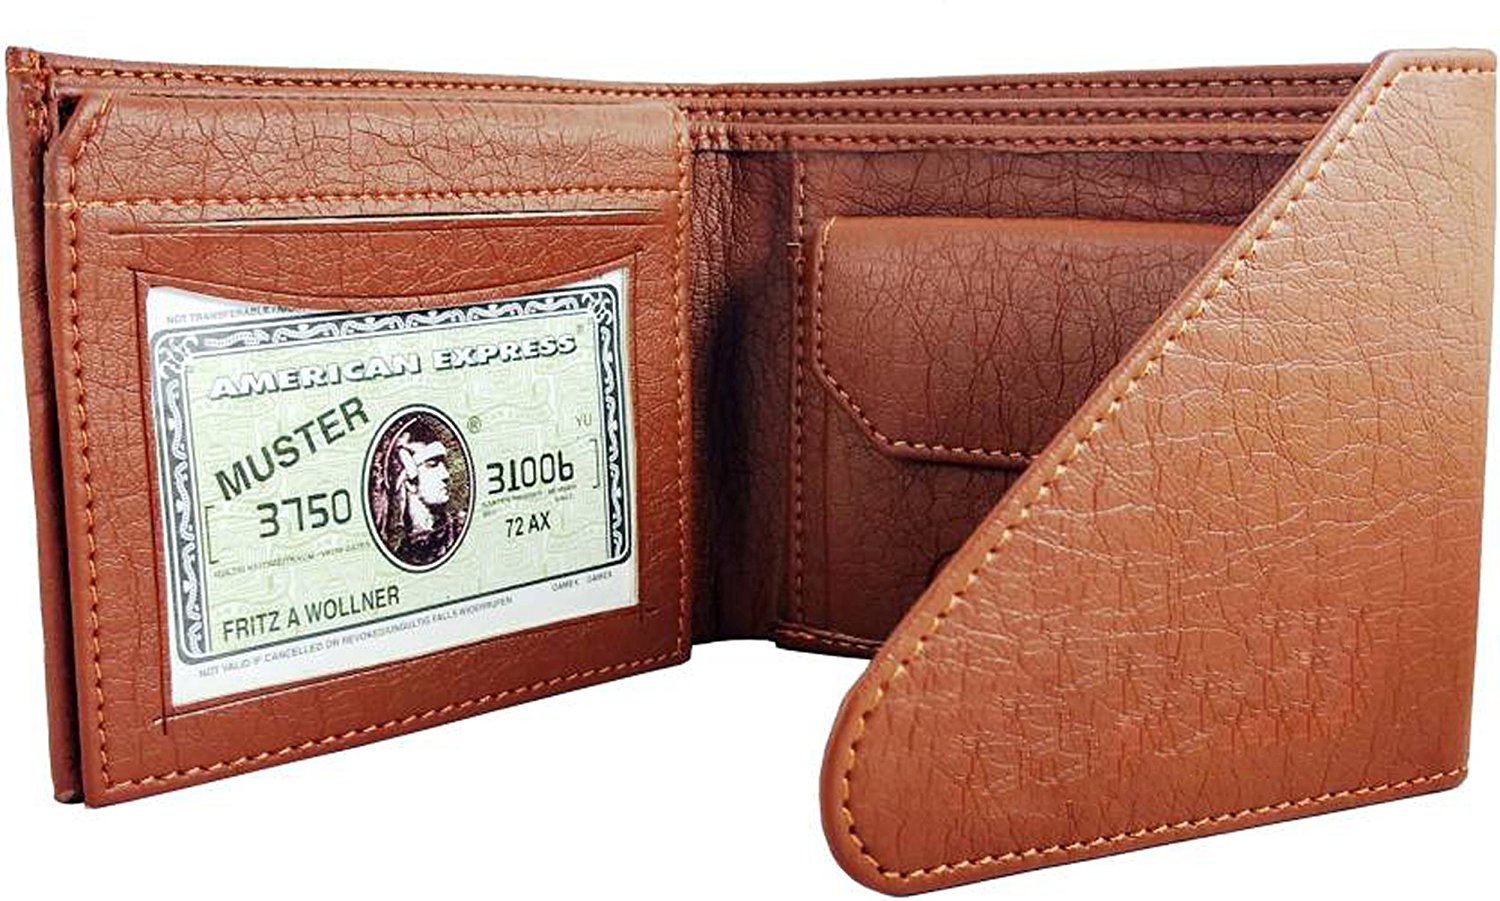 Buy Tri-Fold Pure Tan-Brown Leather Stylish Wallet for Men Online - Get ...